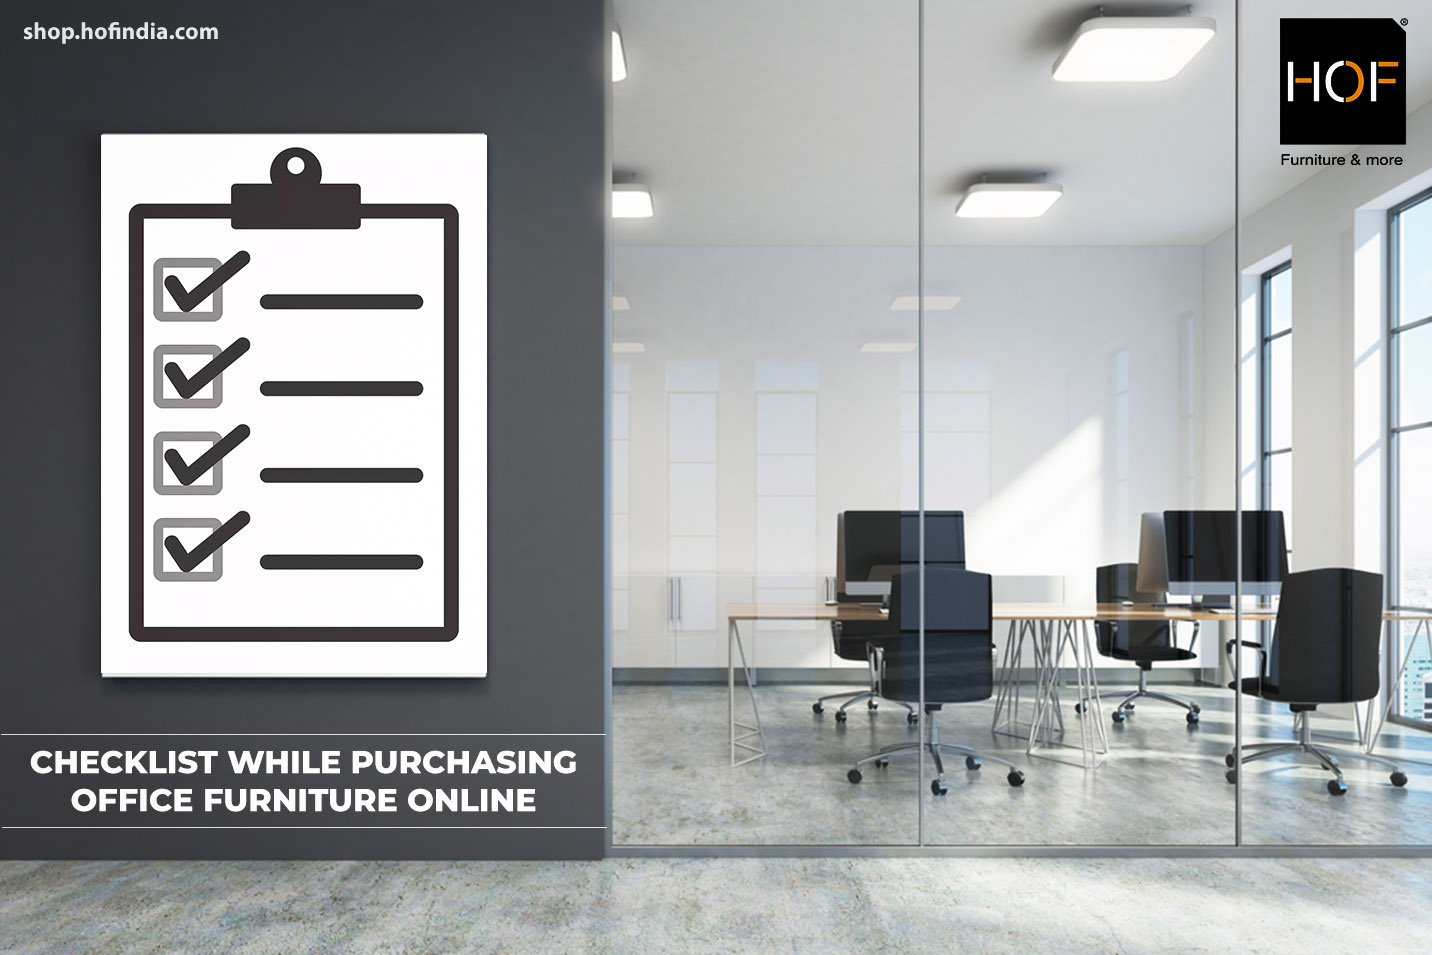 Checklist While Purchasing Office Furniture Online